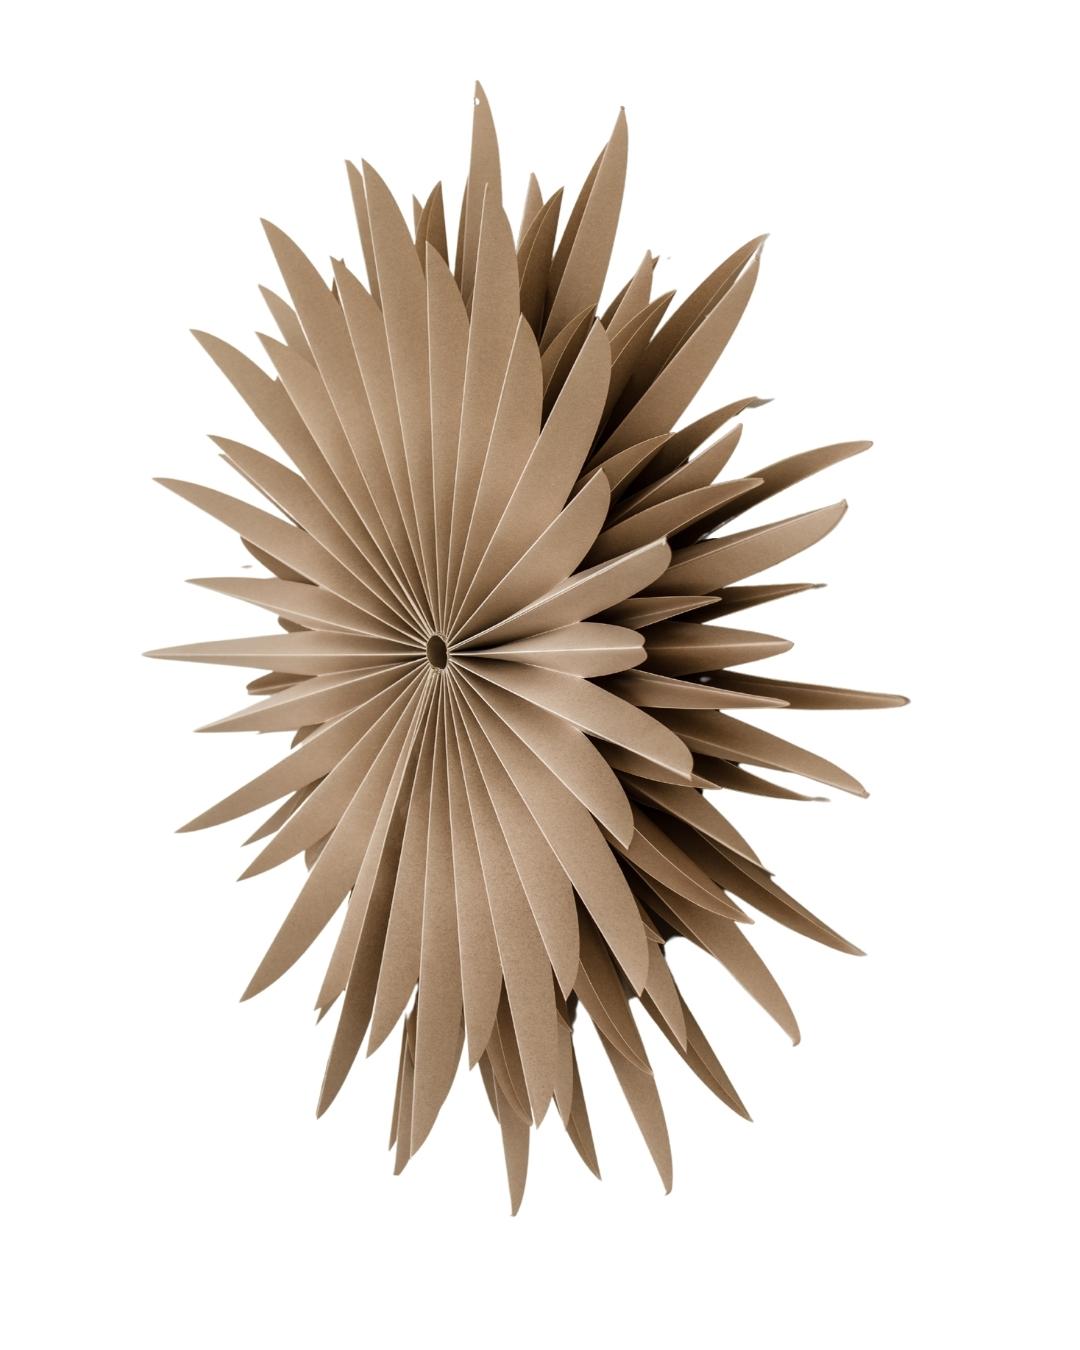 Almond Latte paper Star wall hanging in 70cm diameter on a white background viewed from a side angle